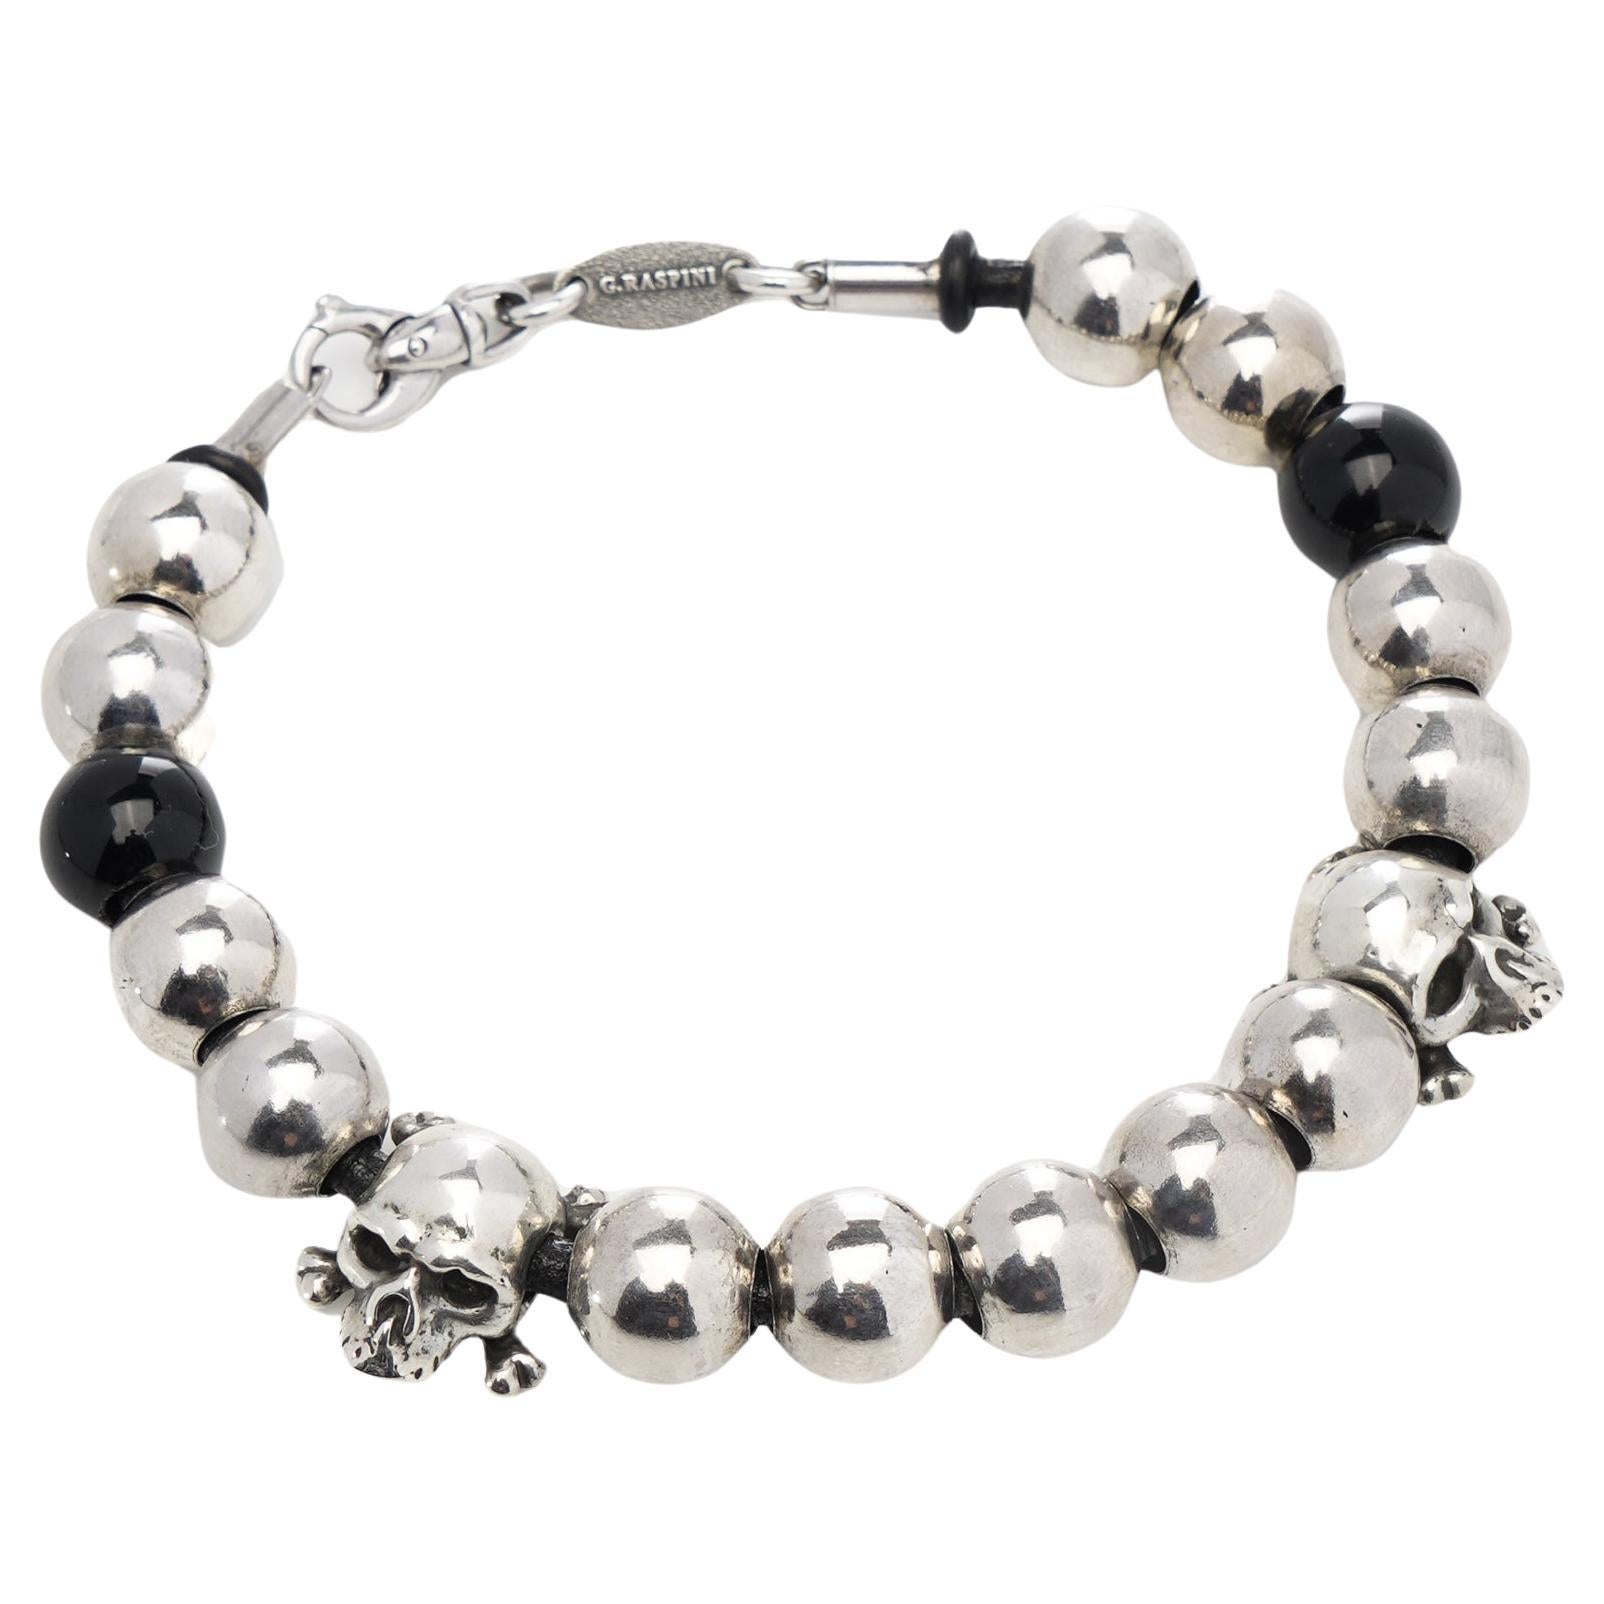 Giovani Raspini sterling 925 silver bead bracelet with skull accents For Sale